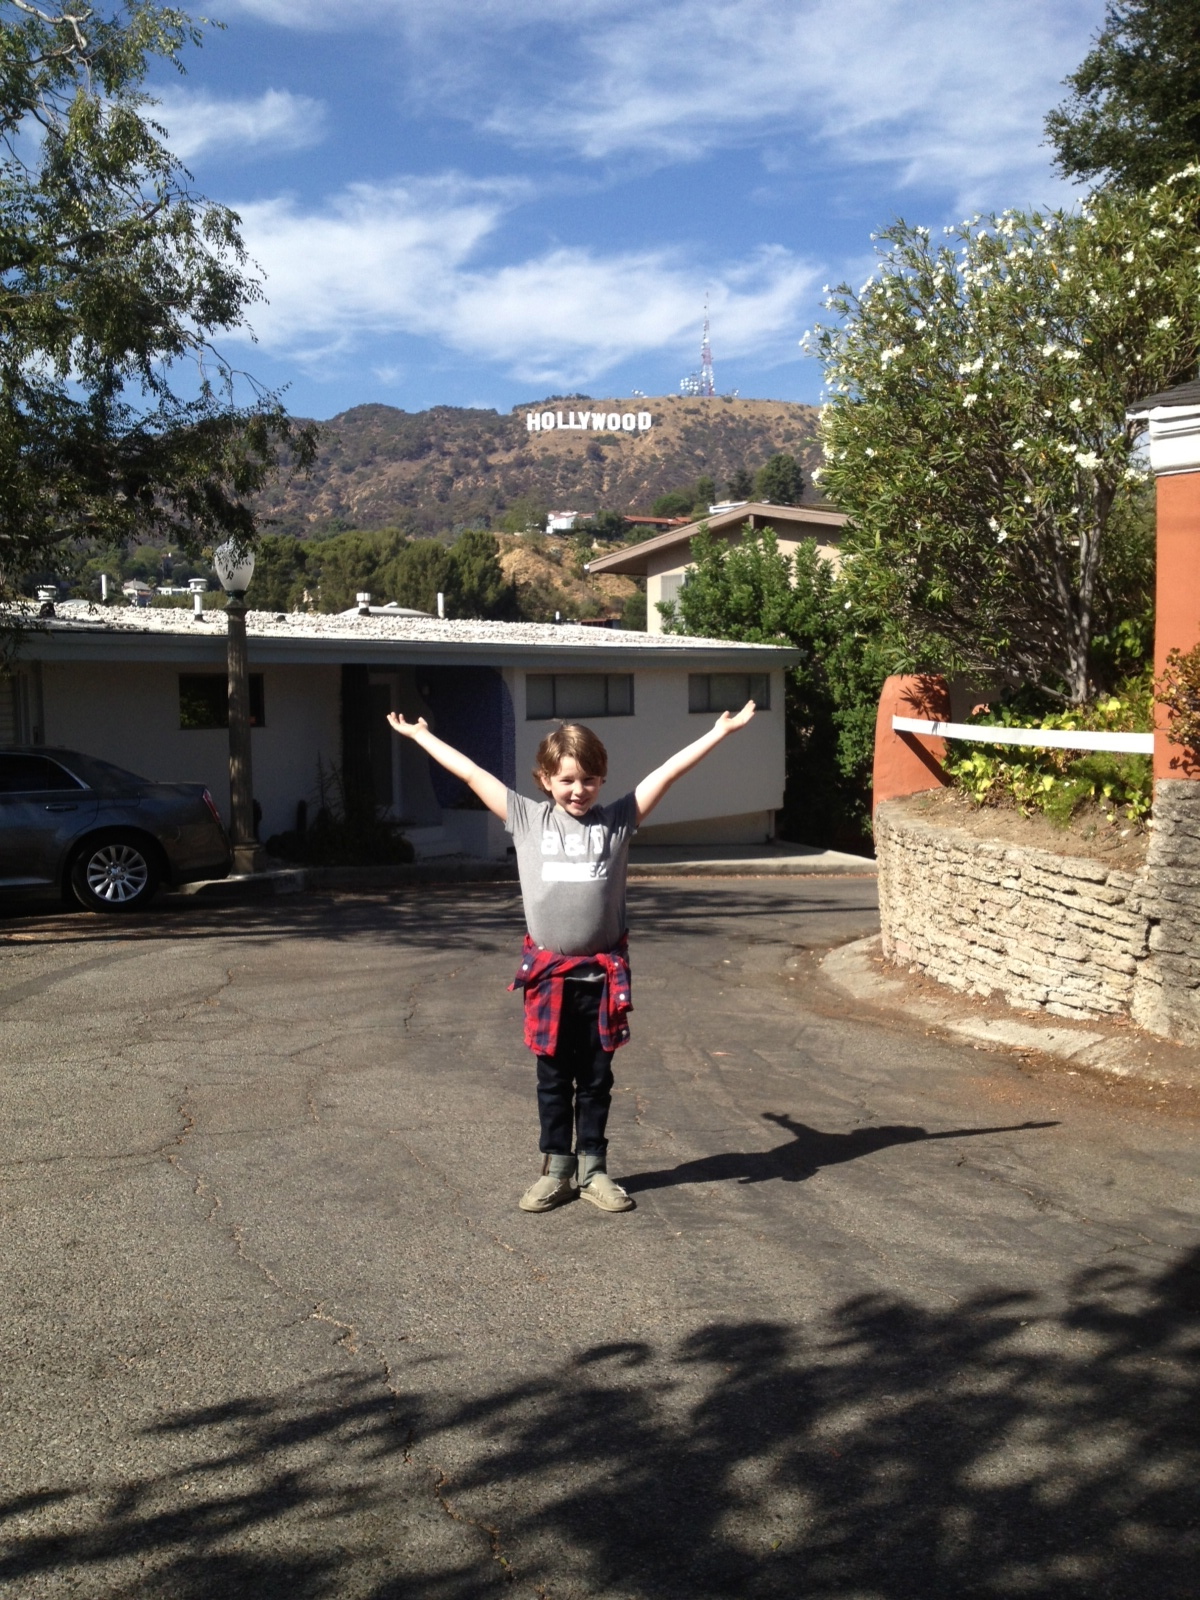 Hooray for Hollywood!